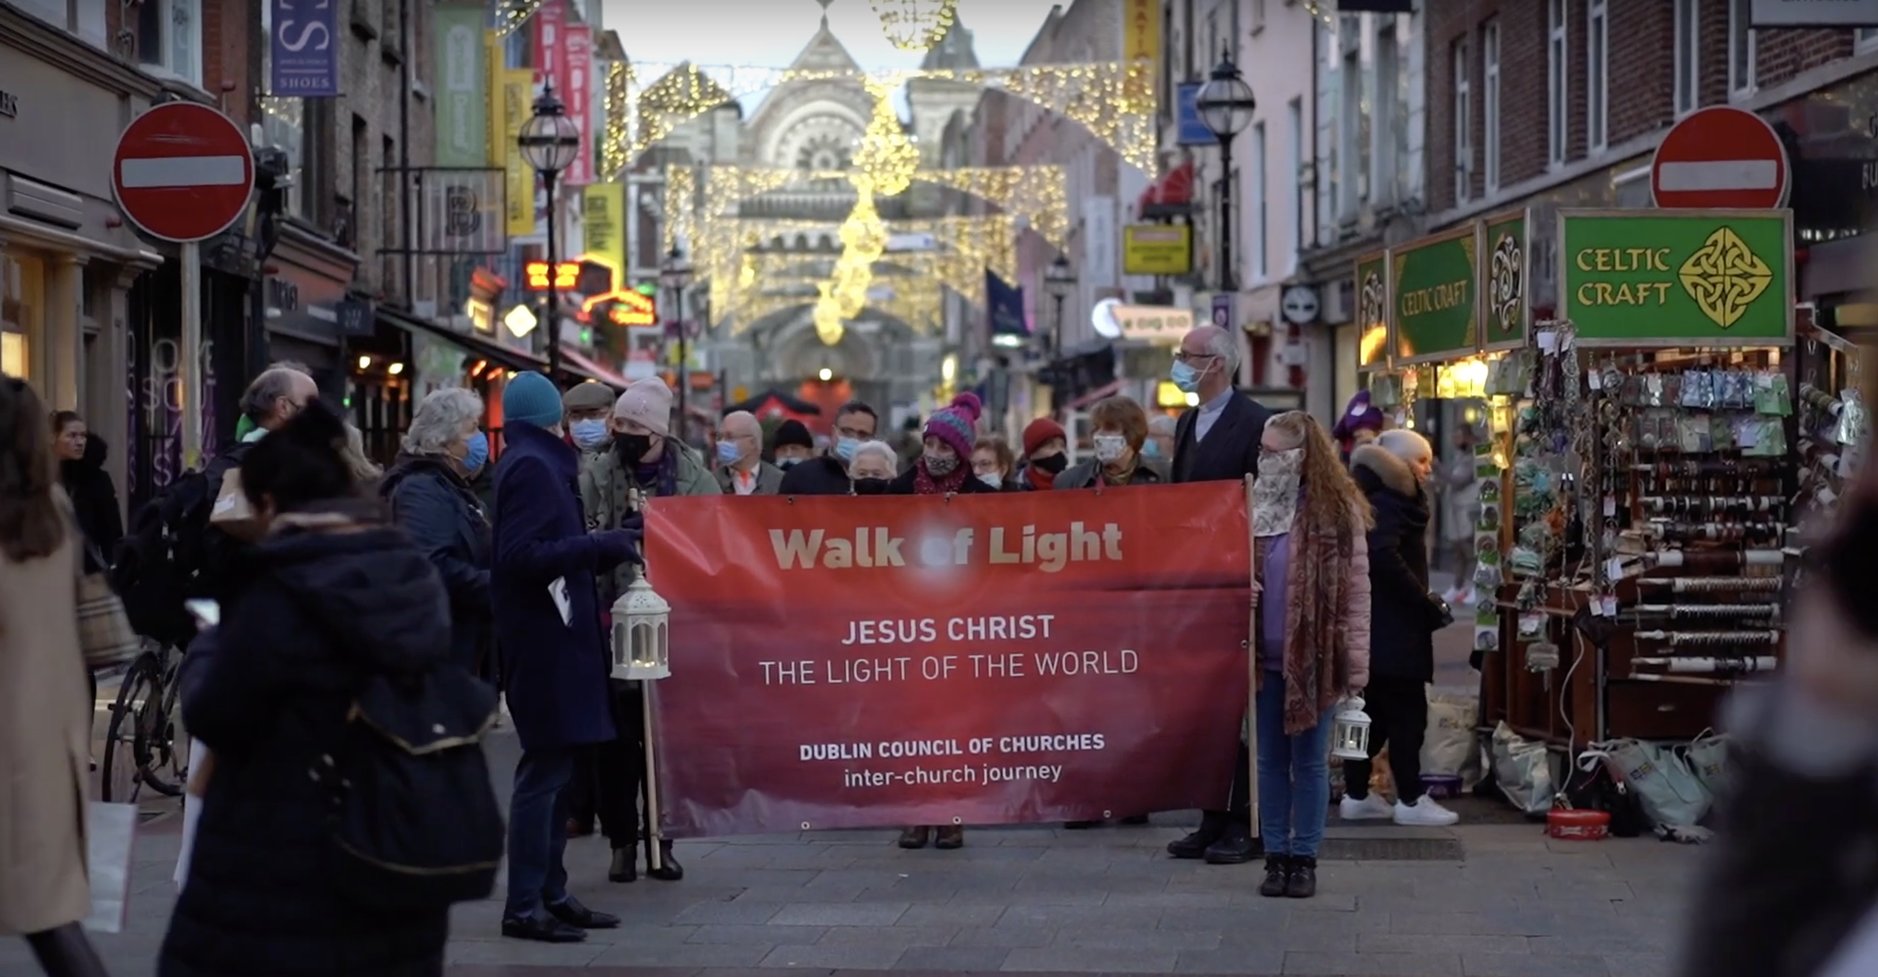 The Walk of Light procession makes its way from St Ann's Church towards Grafton Street.